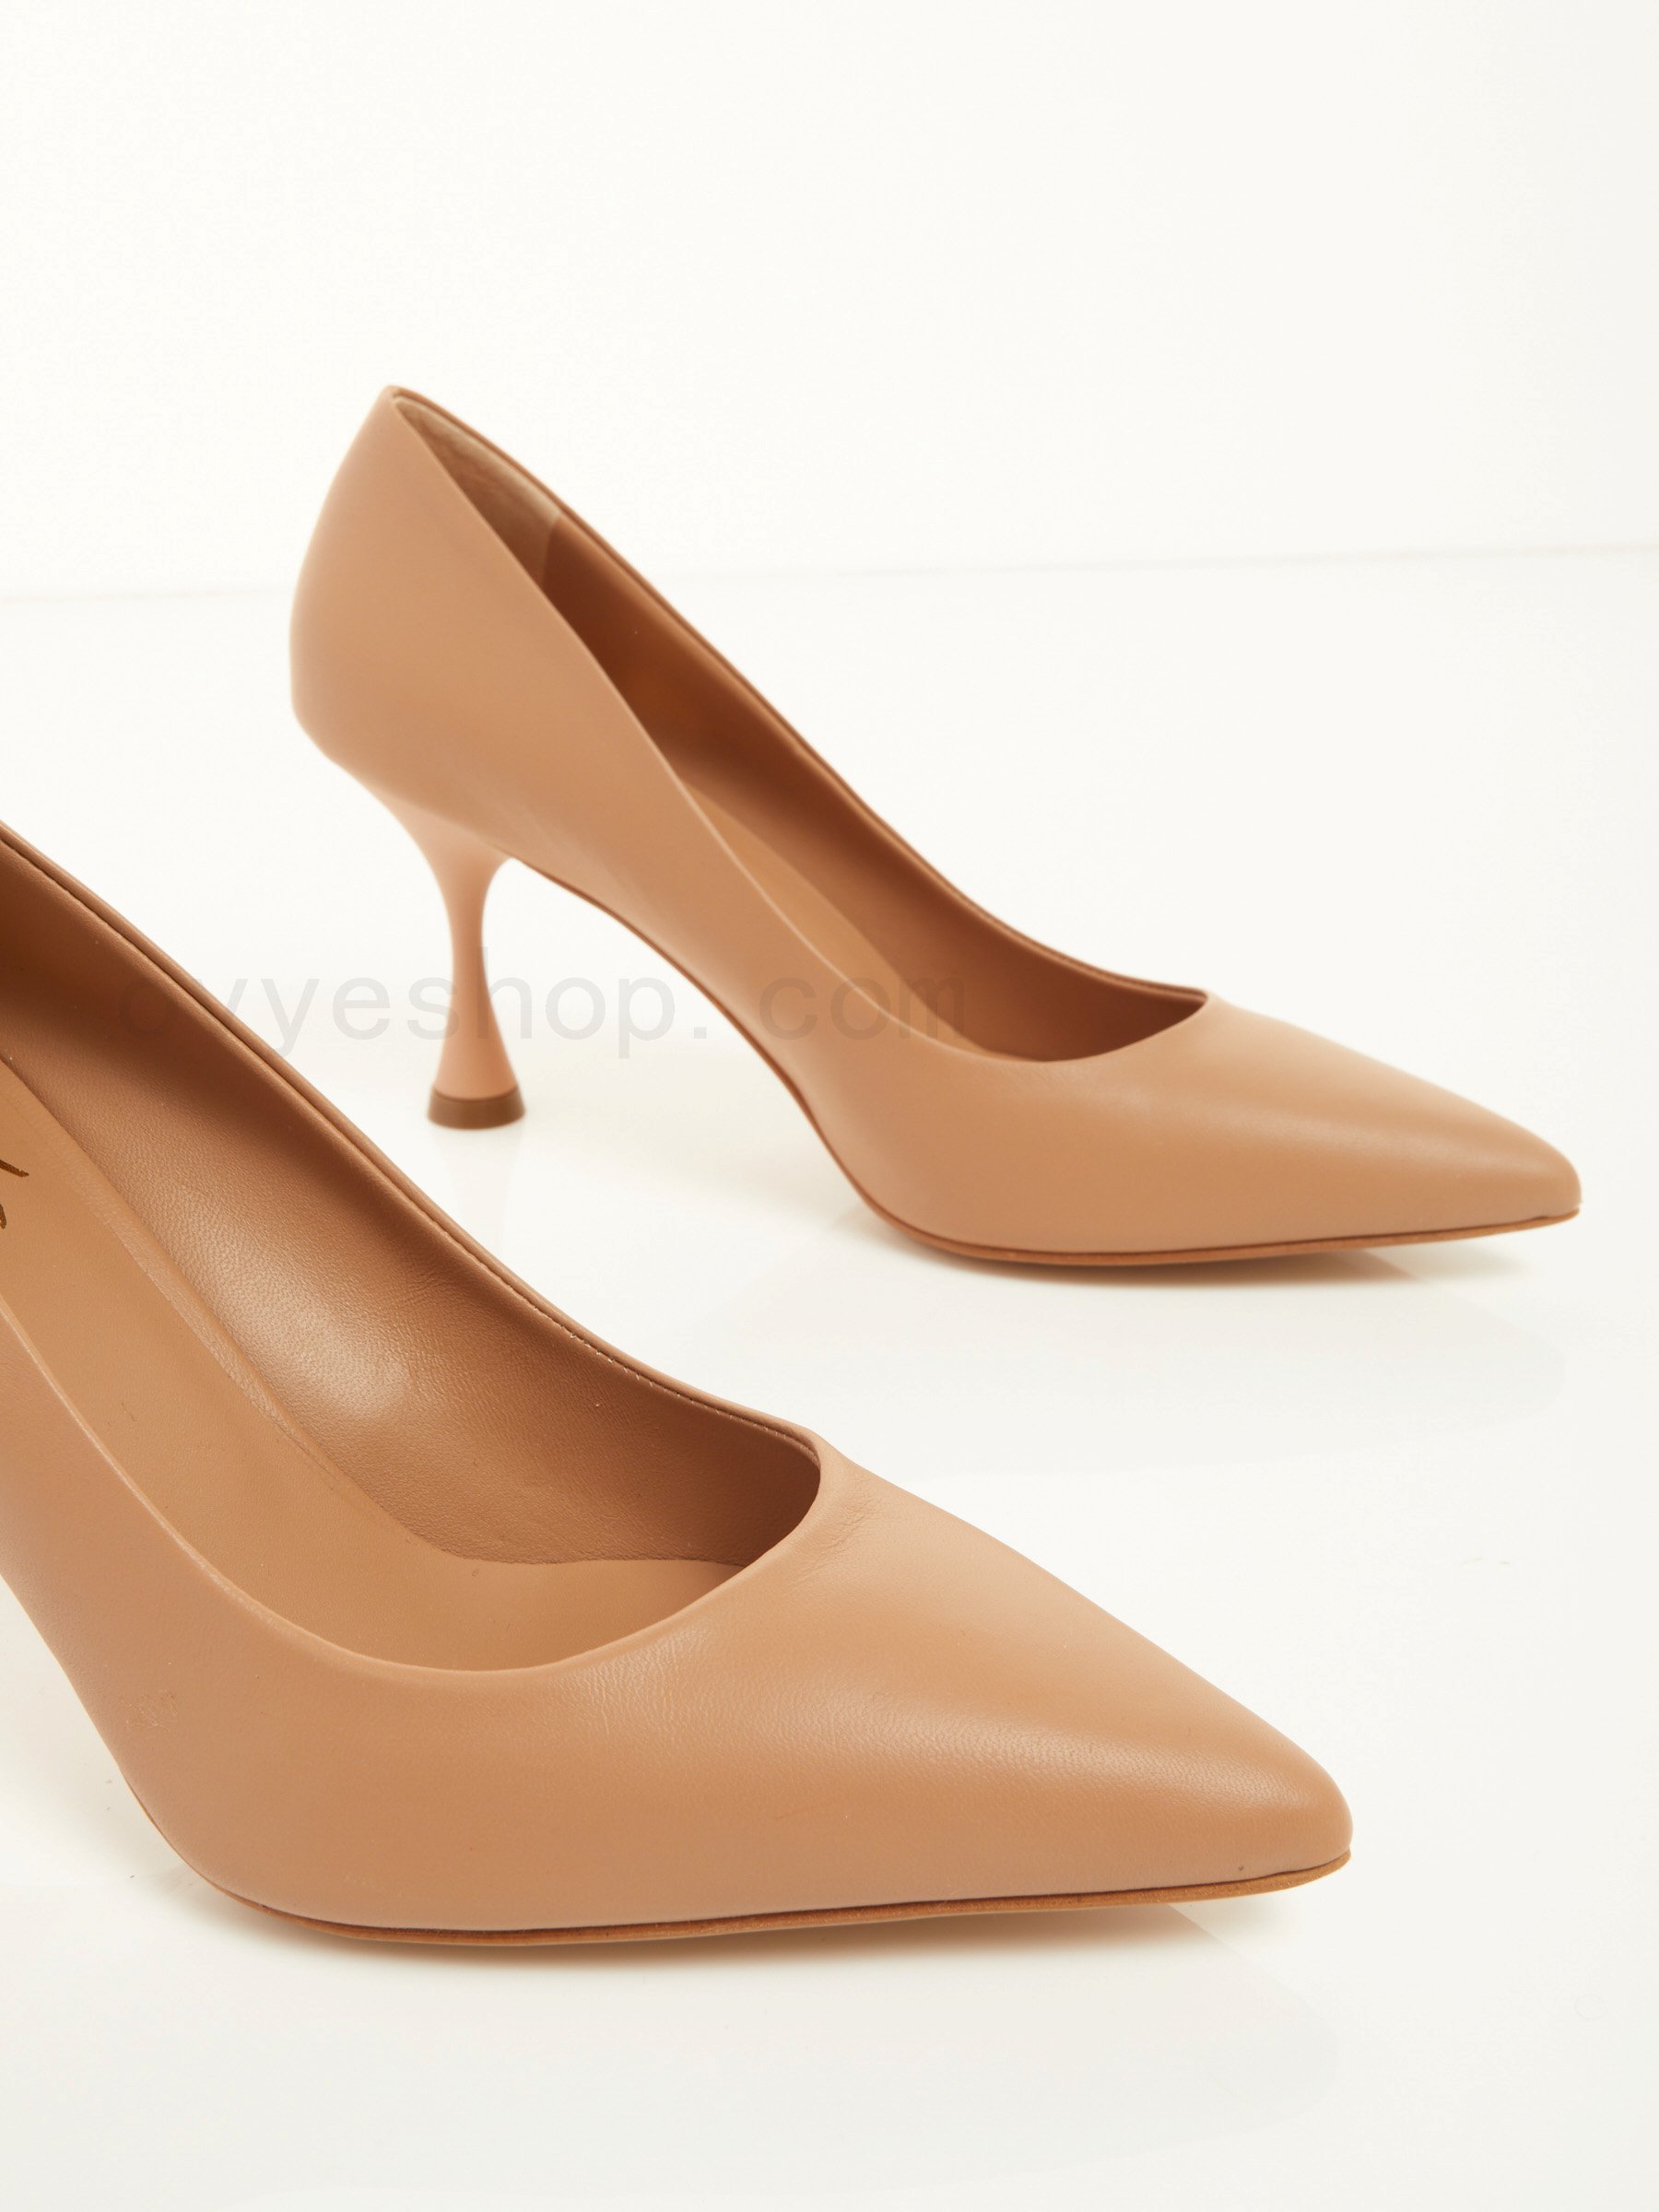 Leather Pump F0817885-0614 scarpe ovy&#232; outlet